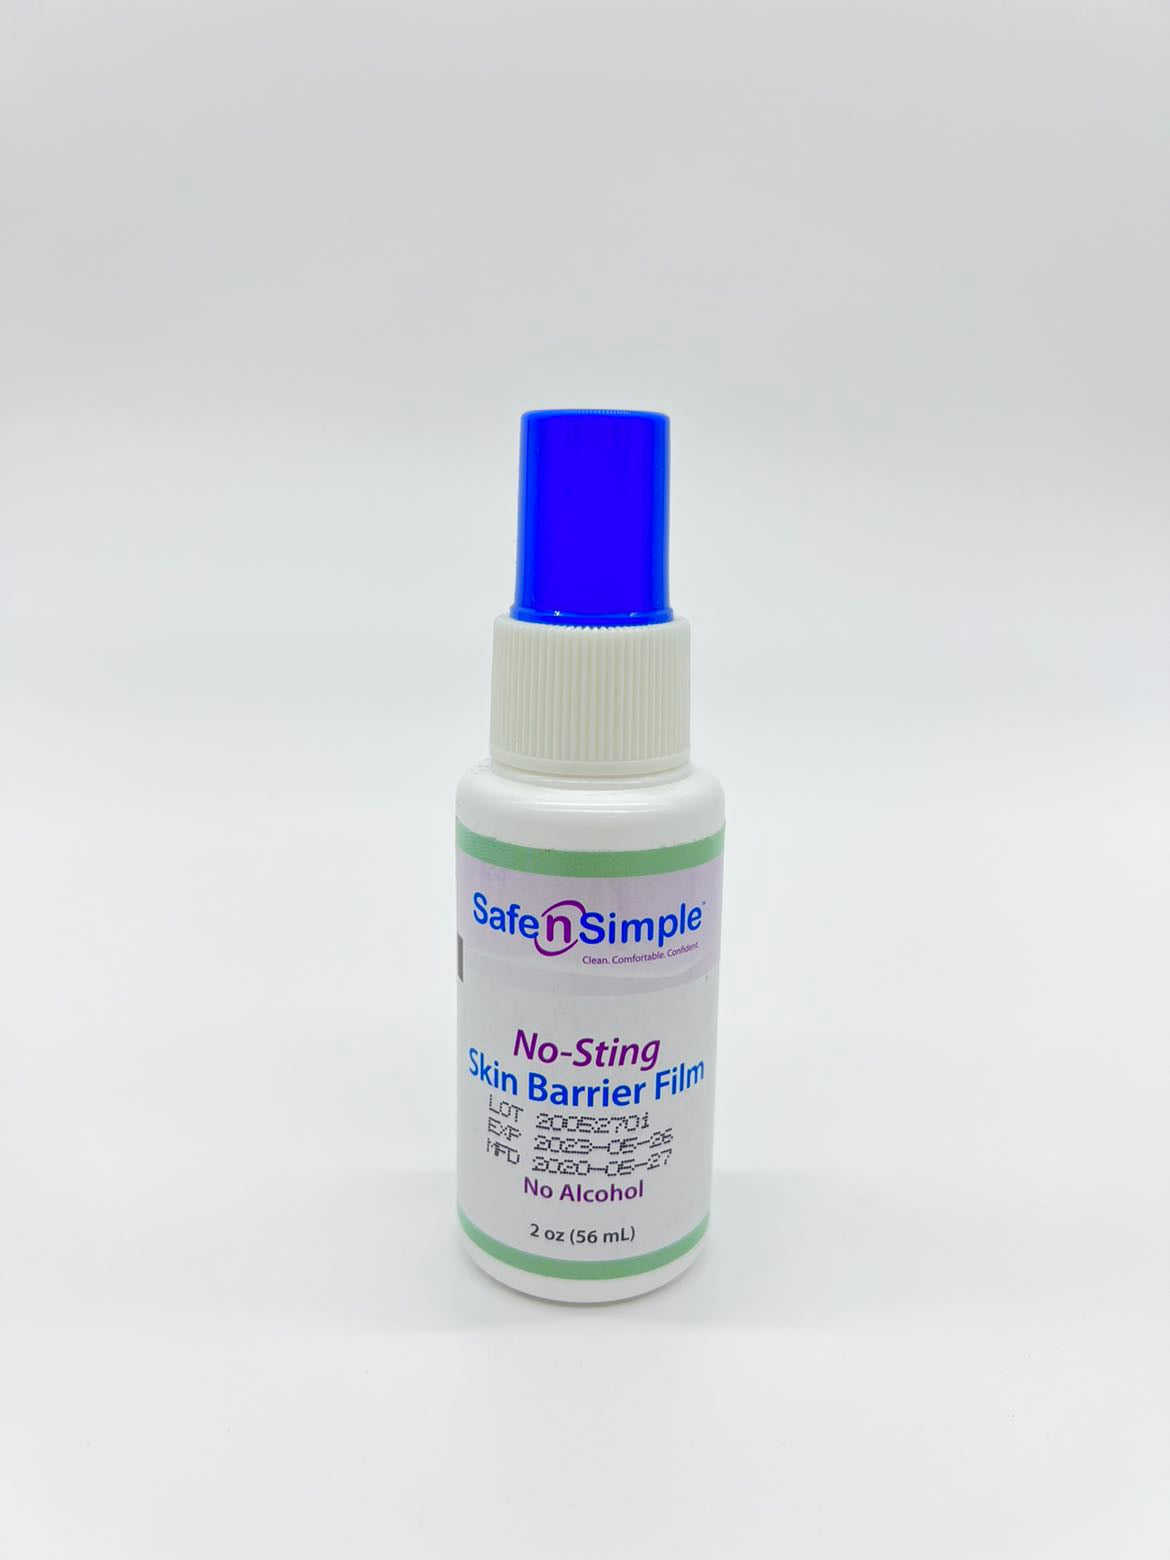 Skin Barrier No-Sting Spray 2 oz | Skin barrier | Great barrier relief | Medical products | Wound care products